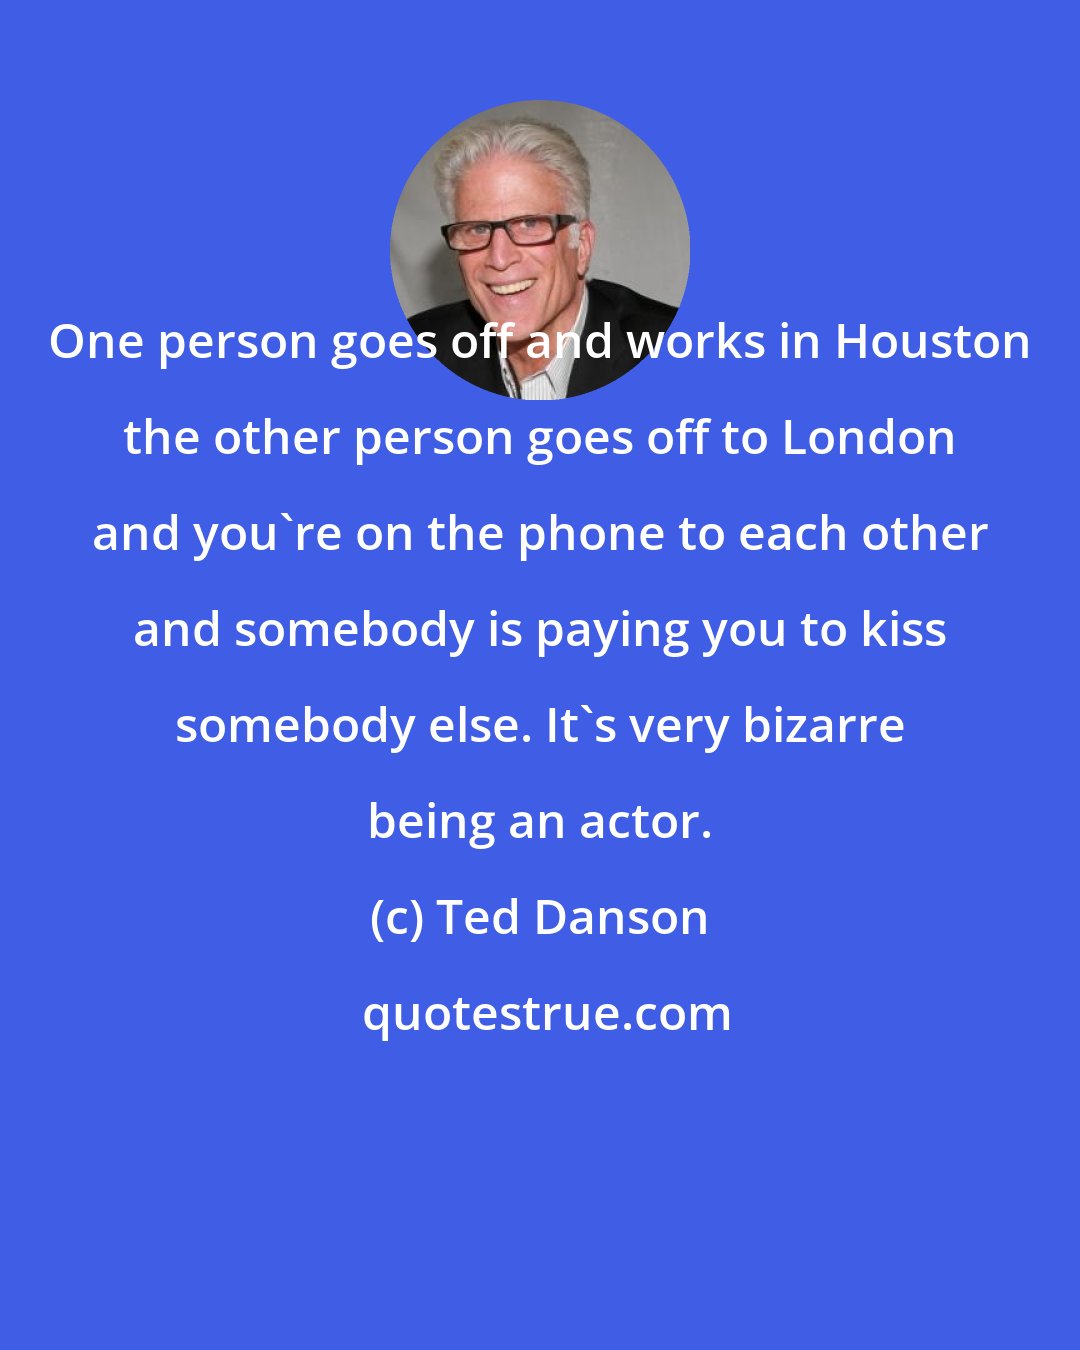 Ted Danson: One person goes off and works in Houston the other person goes off to London and you're on the phone to each other and somebody is paying you to kiss somebody else. It's very bizarre being an actor.